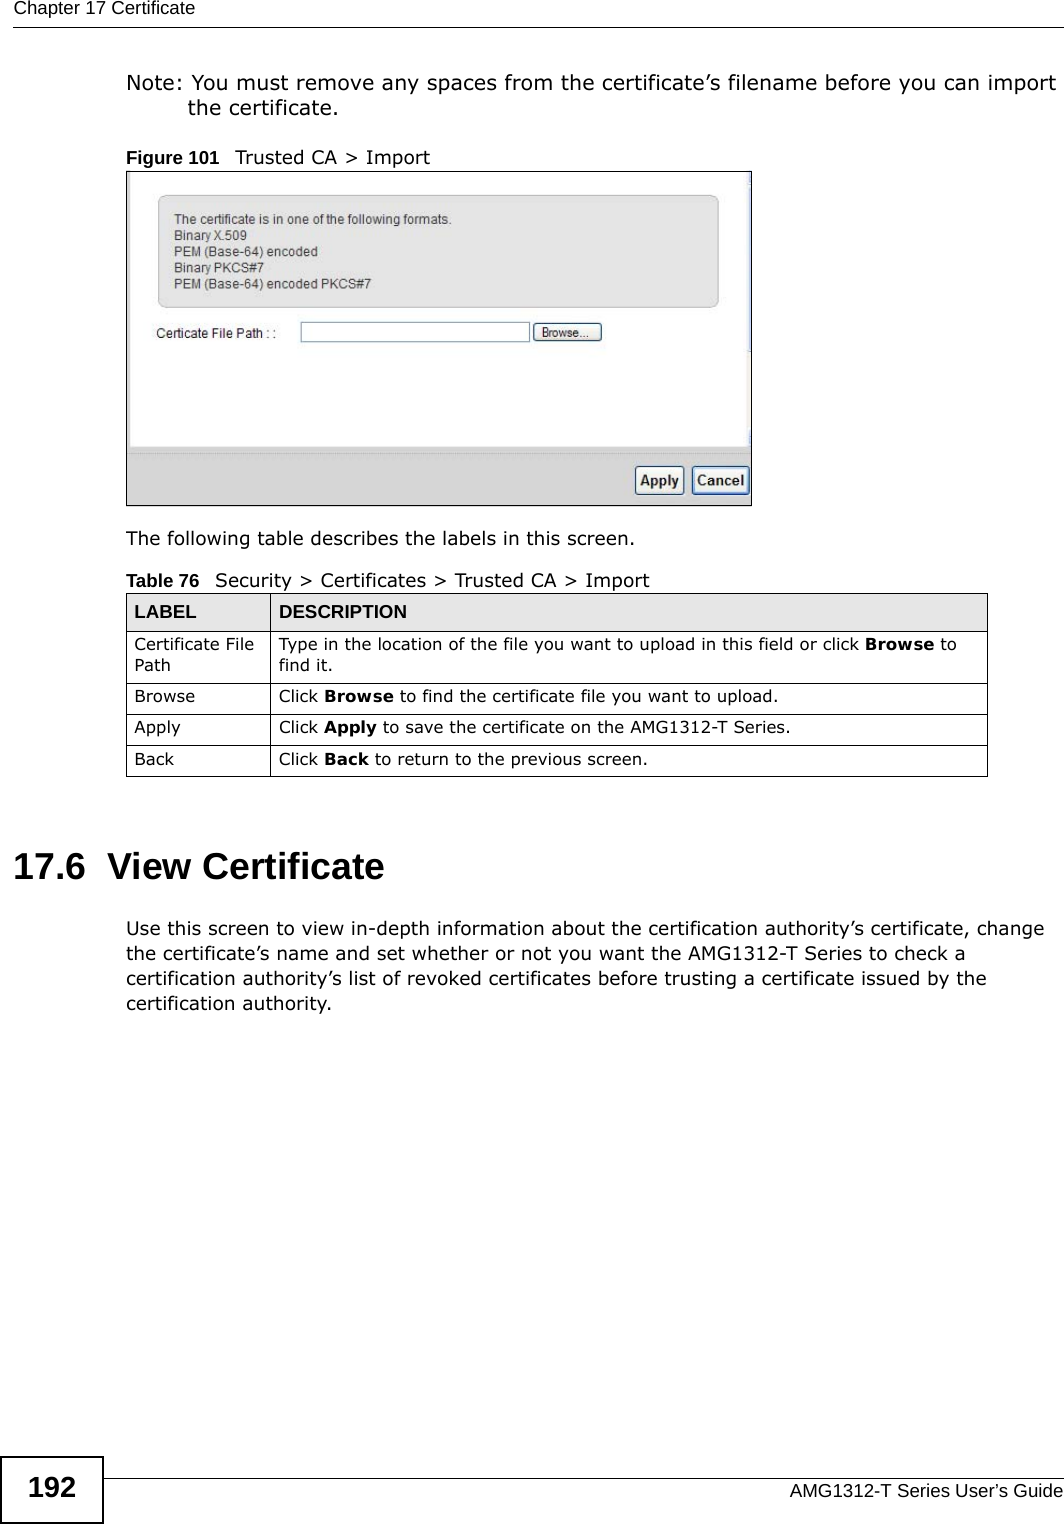 Chapter 17 CertificateAMG1312-T Series User’s Guide192Note: You must remove any spaces from the certificate’s filename before you can import the certificate.Figure 101   Trusted CA &gt; ImportThe following table describes the labels in this screen.17.6  View Certificate Use this screen to view in-depth information about the certification authority’s certificate, change the certificate’s name and set whether or not you want the AMG1312-T Series to check a certification authority’s list of revoked certificates before trusting a certificate issued by the certification authority.Table 76   Security &gt; Certificates &gt; Trusted CA &gt; ImportLABEL DESCRIPTIONCertificate File Path Type in the location of the file you want to upload in this field or click Browse to find it.Browse Click Browse to find the certificate file you want to upload. Apply Click Apply to save the certificate on the AMG1312-T Series.Back Click Back to return to the previous screen.